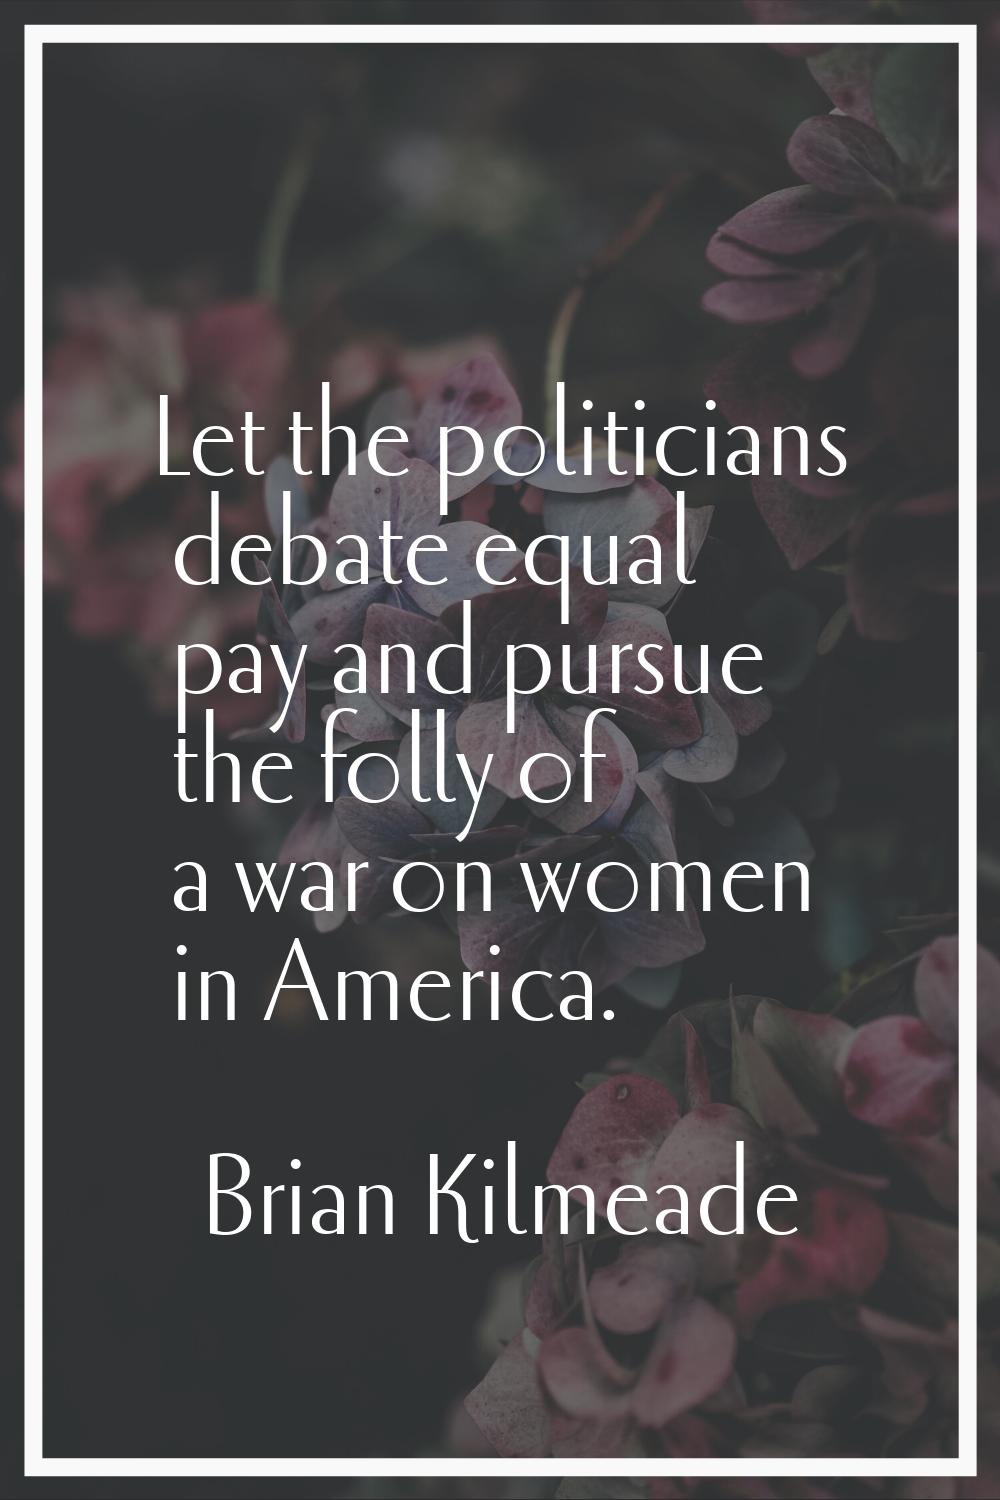 Let the politicians debate equal pay and pursue the folly of a war on women in America.